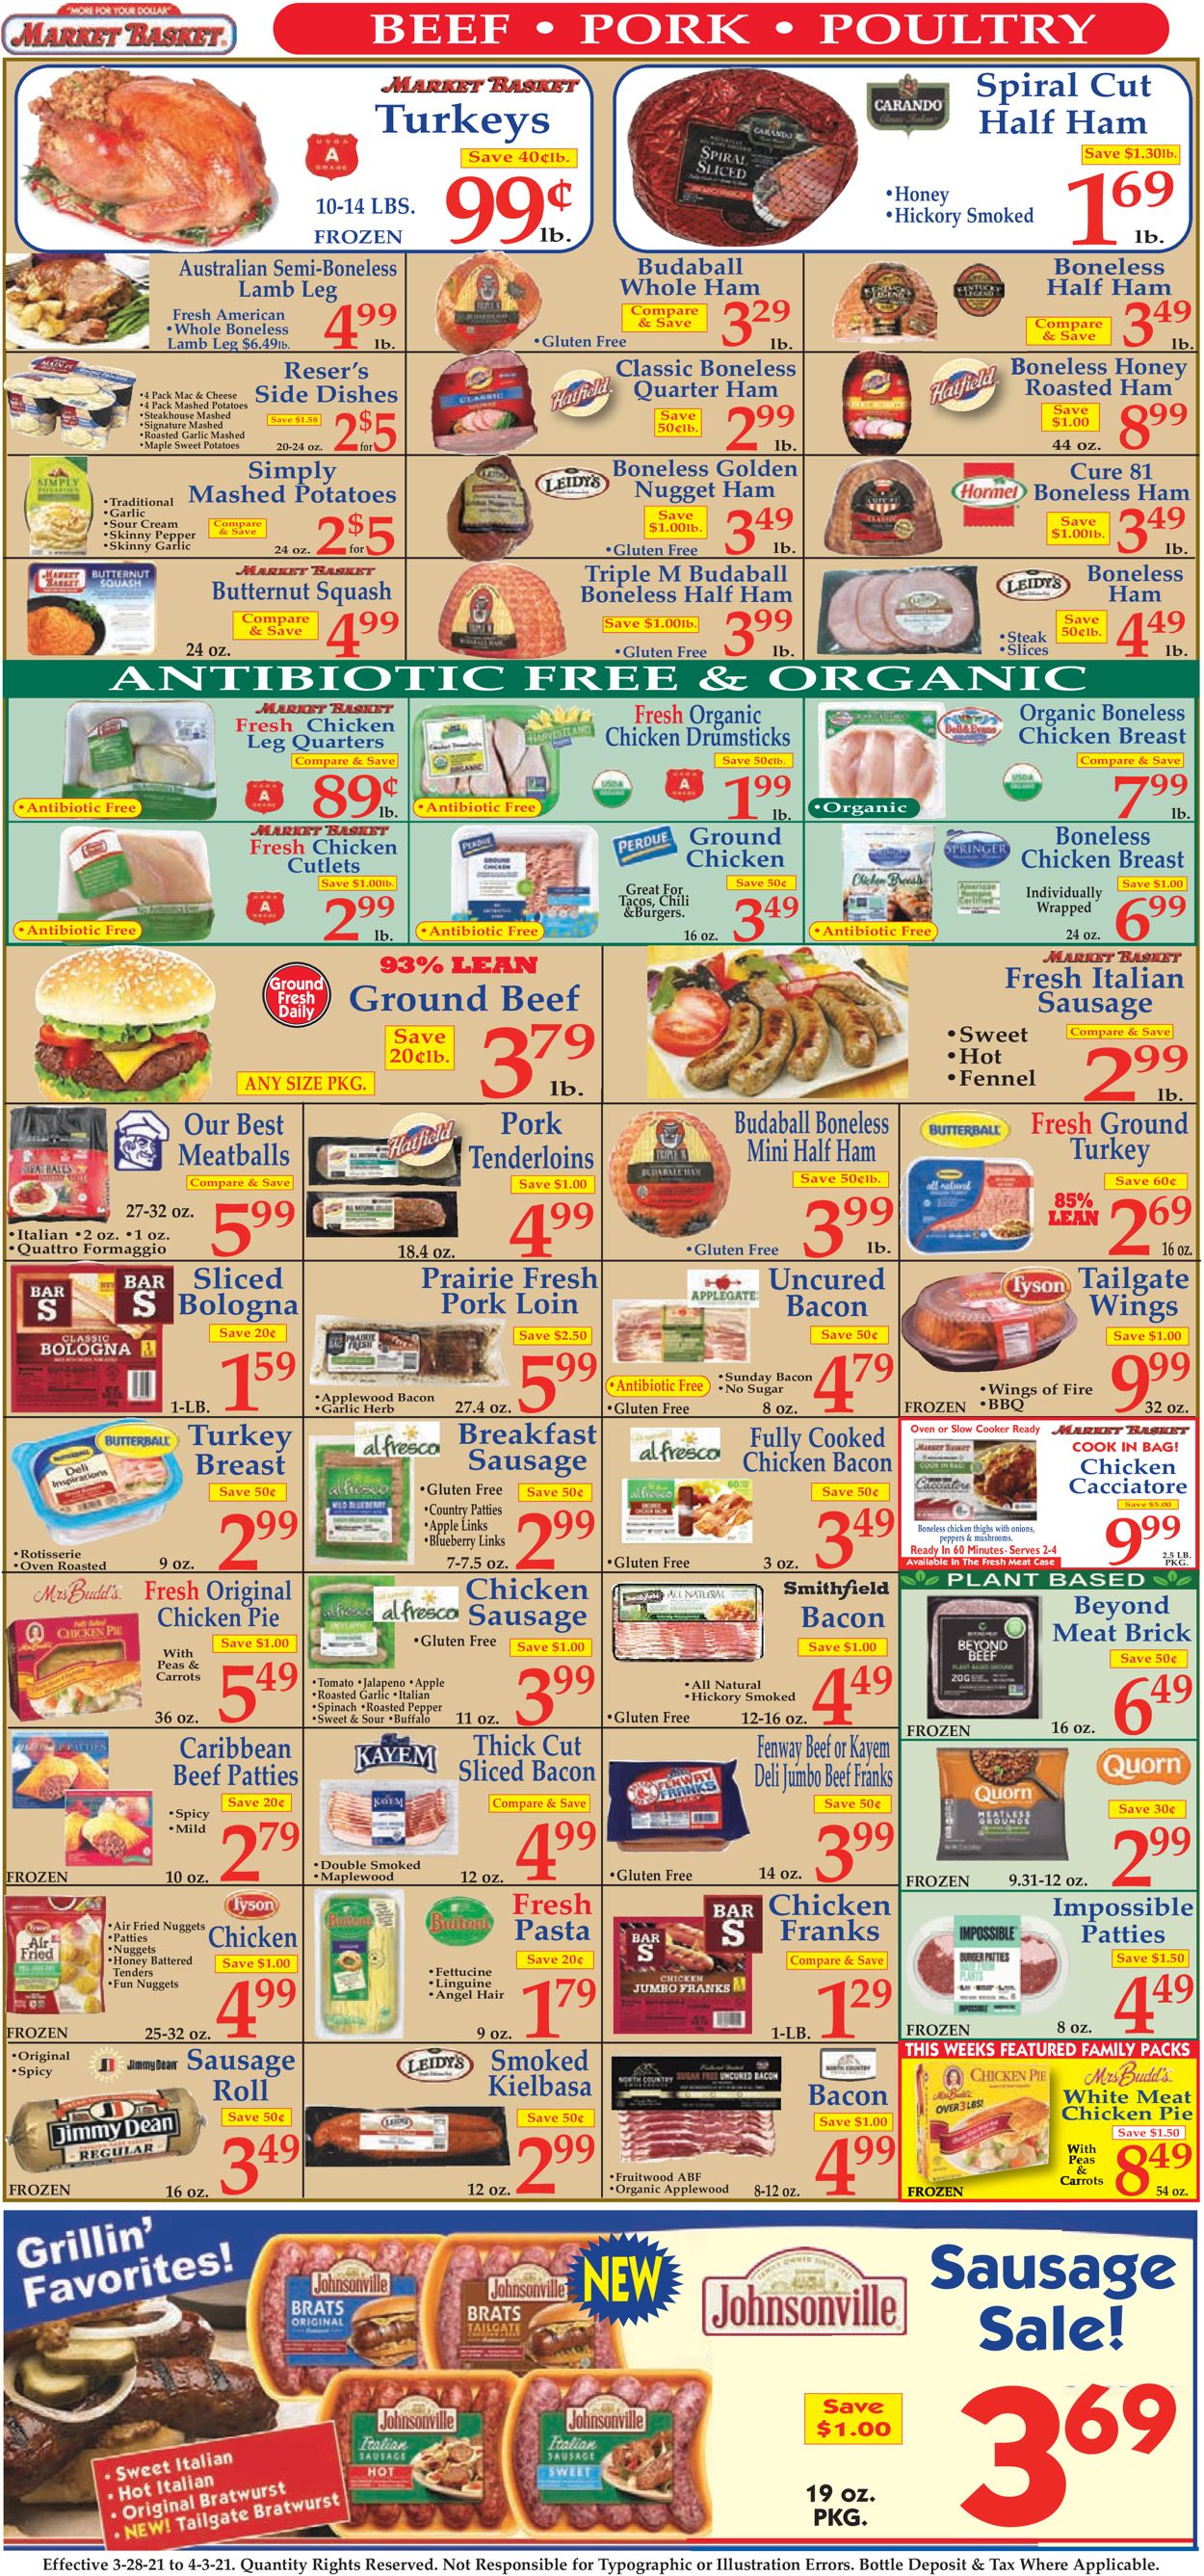 Catalogue Market Basket  Easter 2021 ad from 03/28/2021